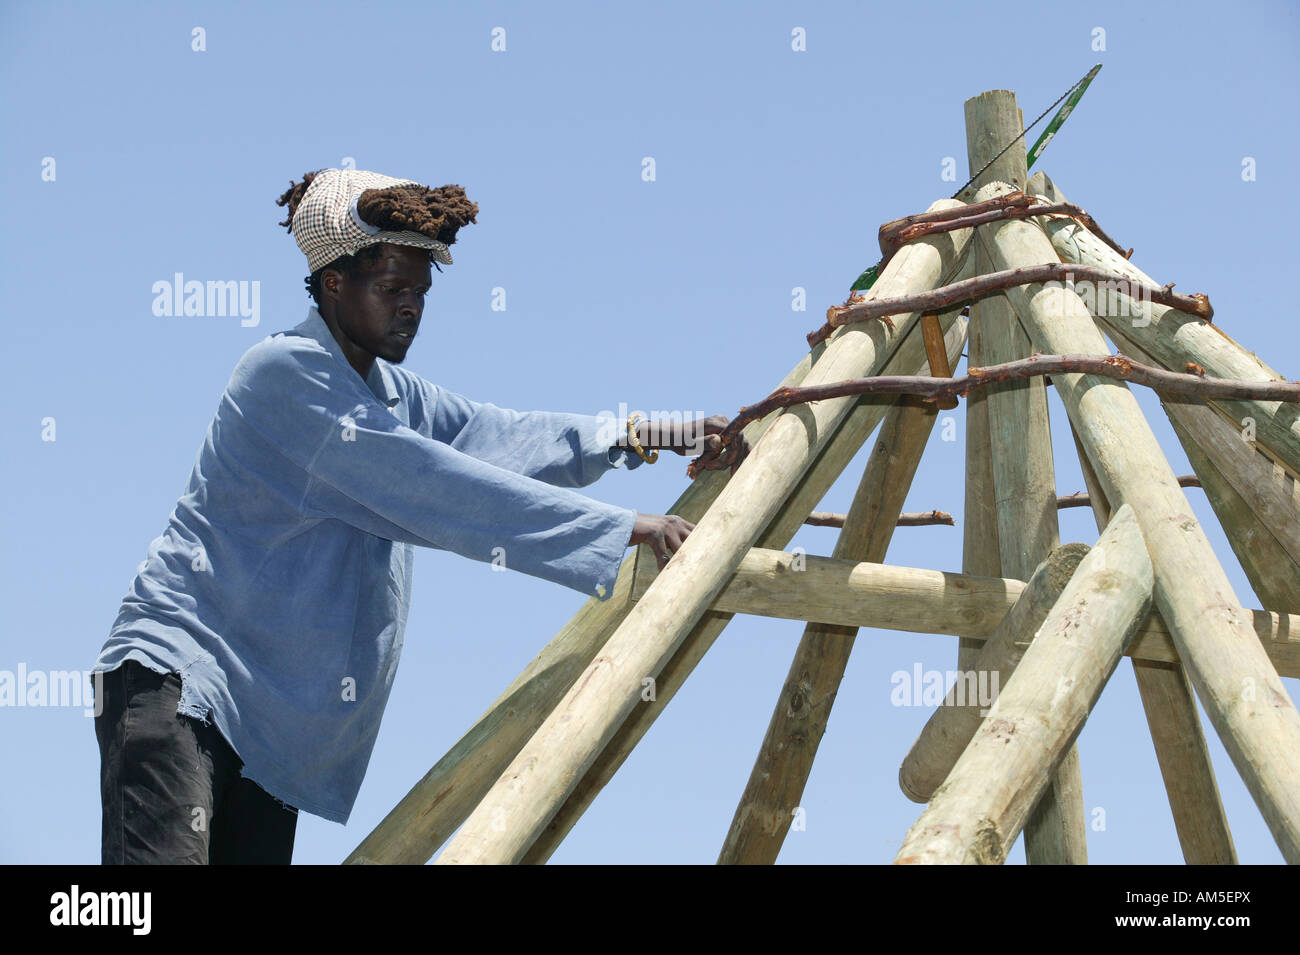 Rasta of the Rasta Community building a traditional roof truss of a round hut, Cape Town, South Africa Stock Photo